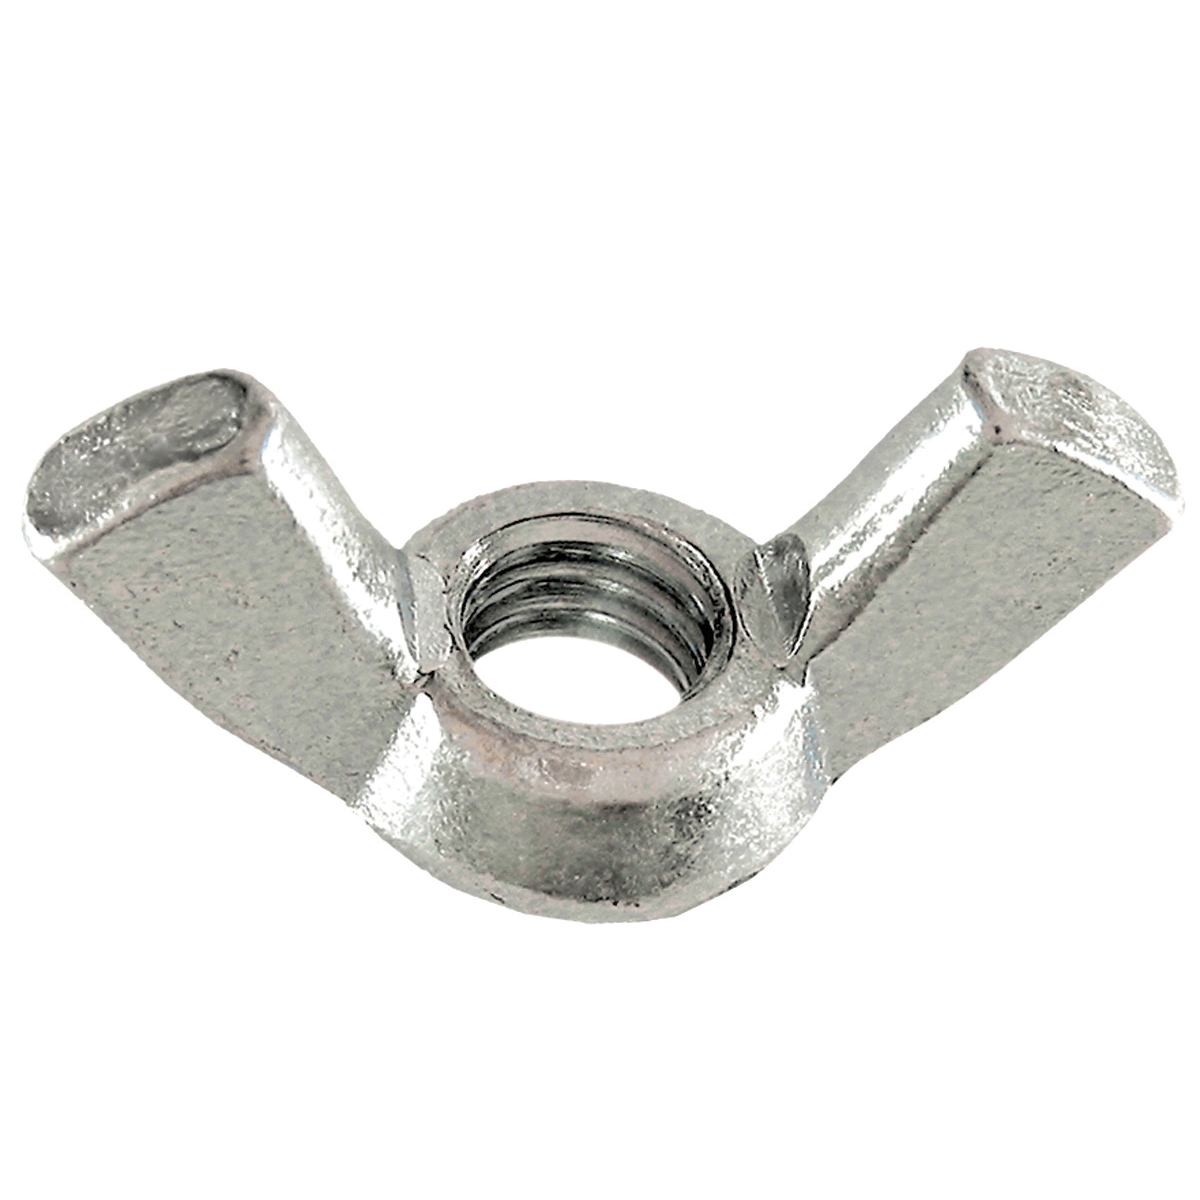 Paulin® 5038-114 Wing Nut, 1/4-20, Stainless Steel, Polished, 18-8 Material Grade